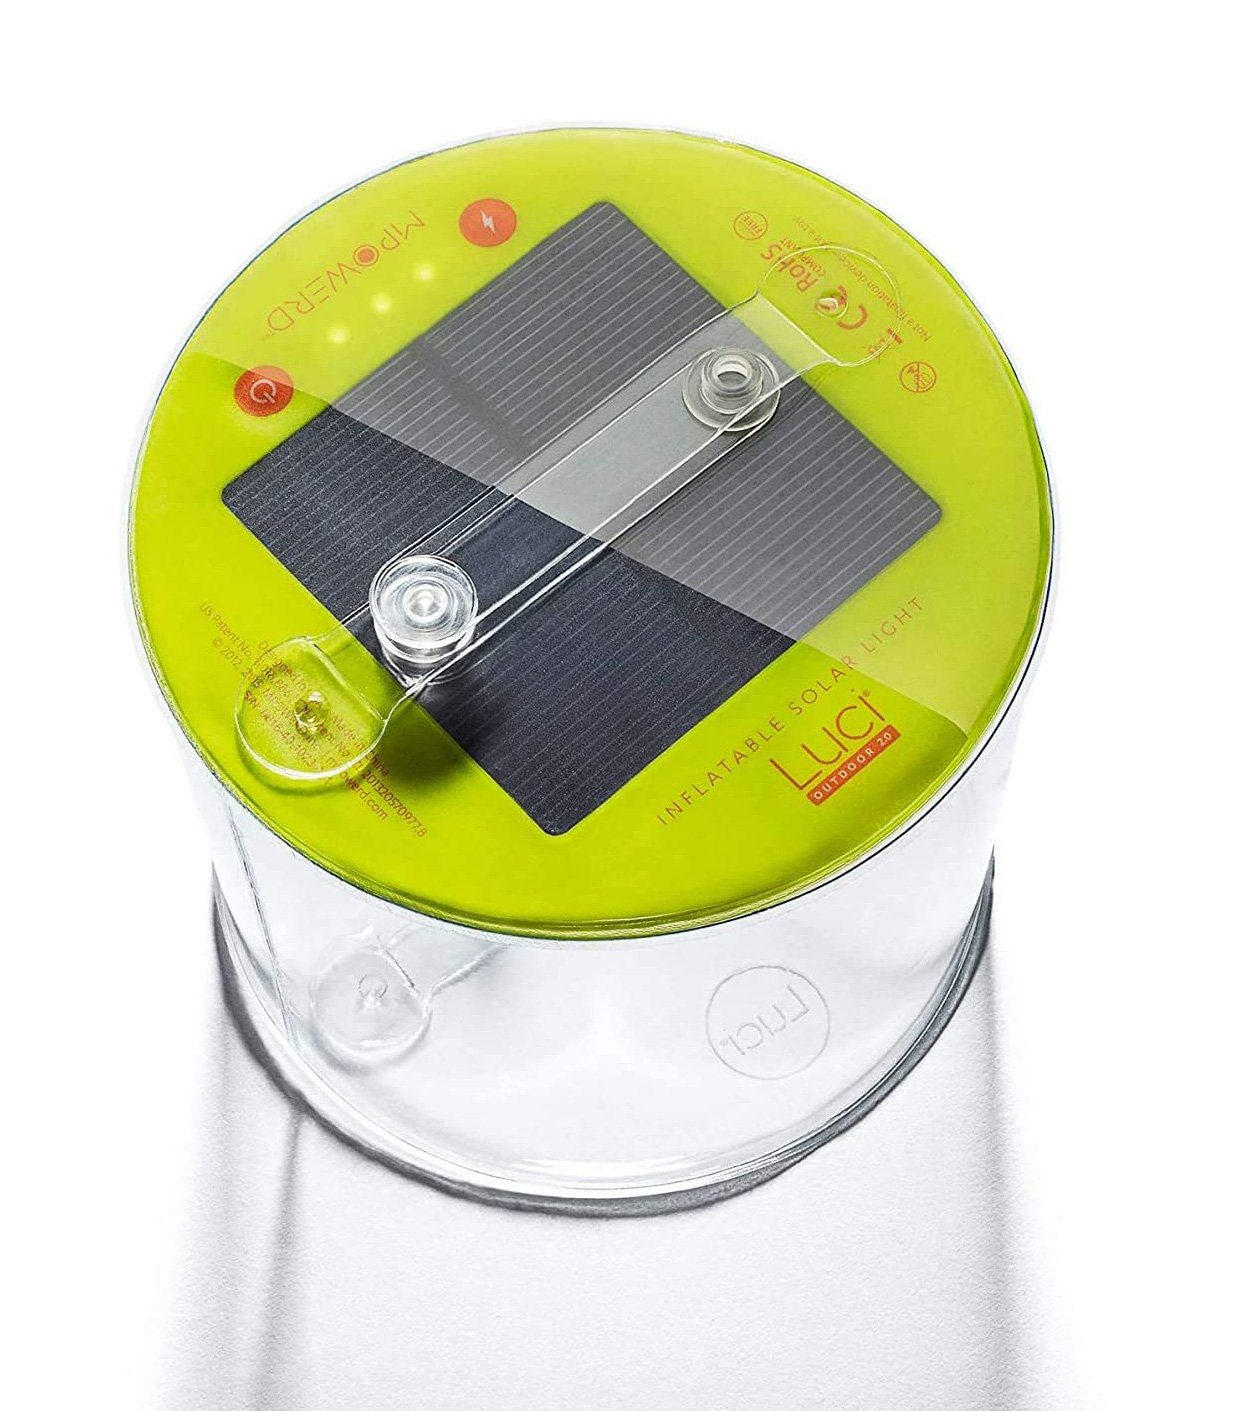 Luci 2.0 Inflatable Solar Lights